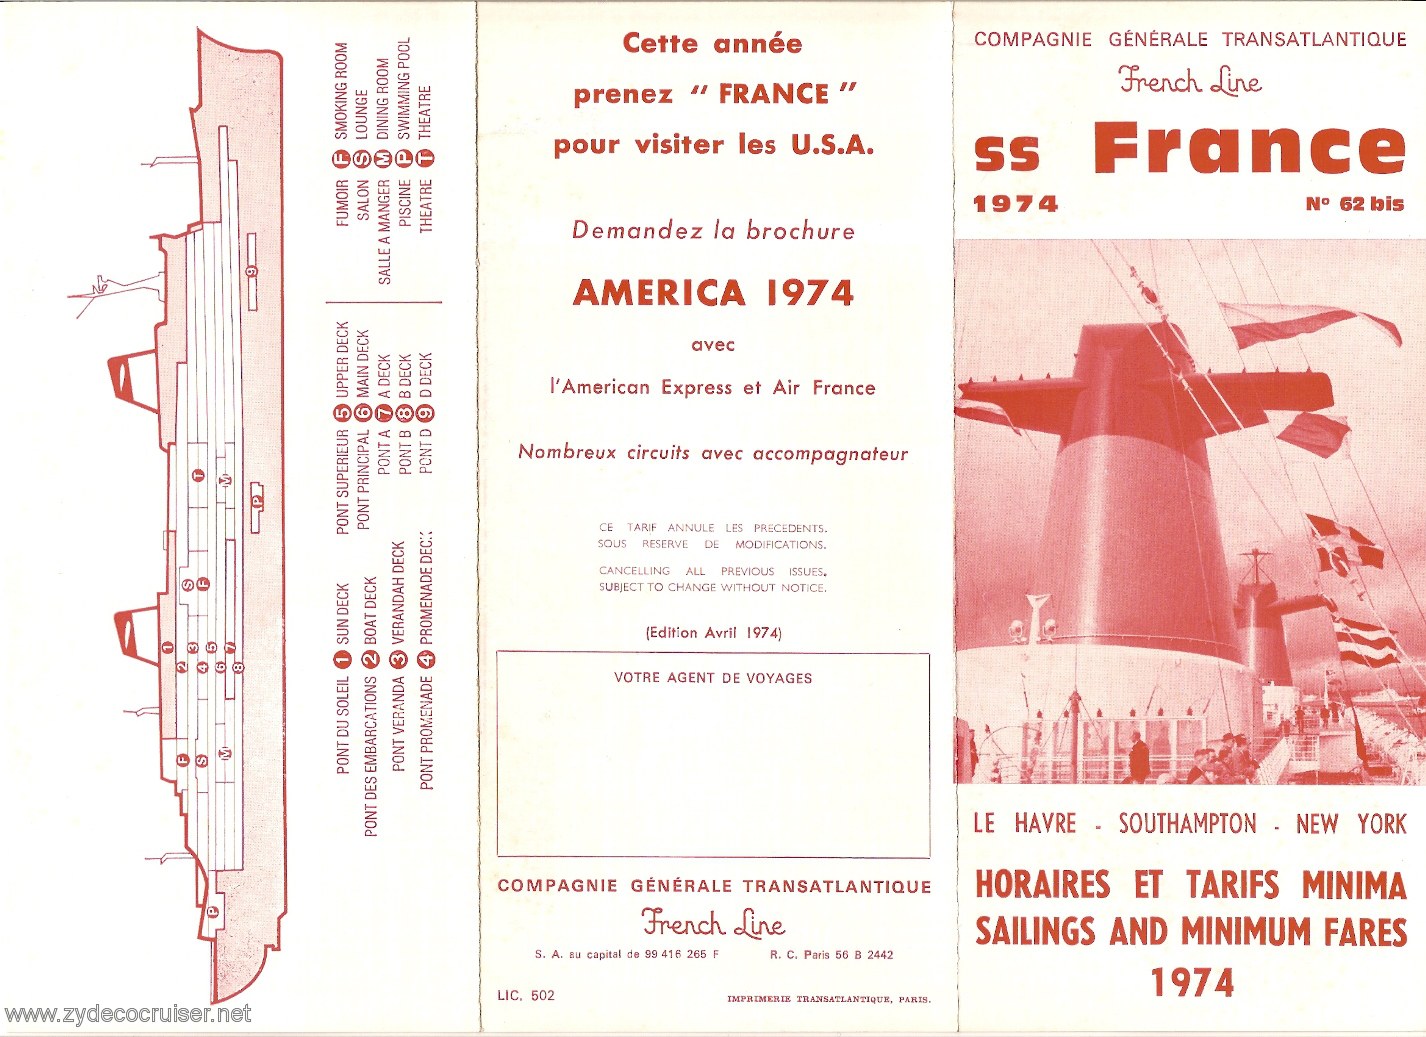 SS France, French Line, Sailings and Minimum Fares, Side 1, 1974